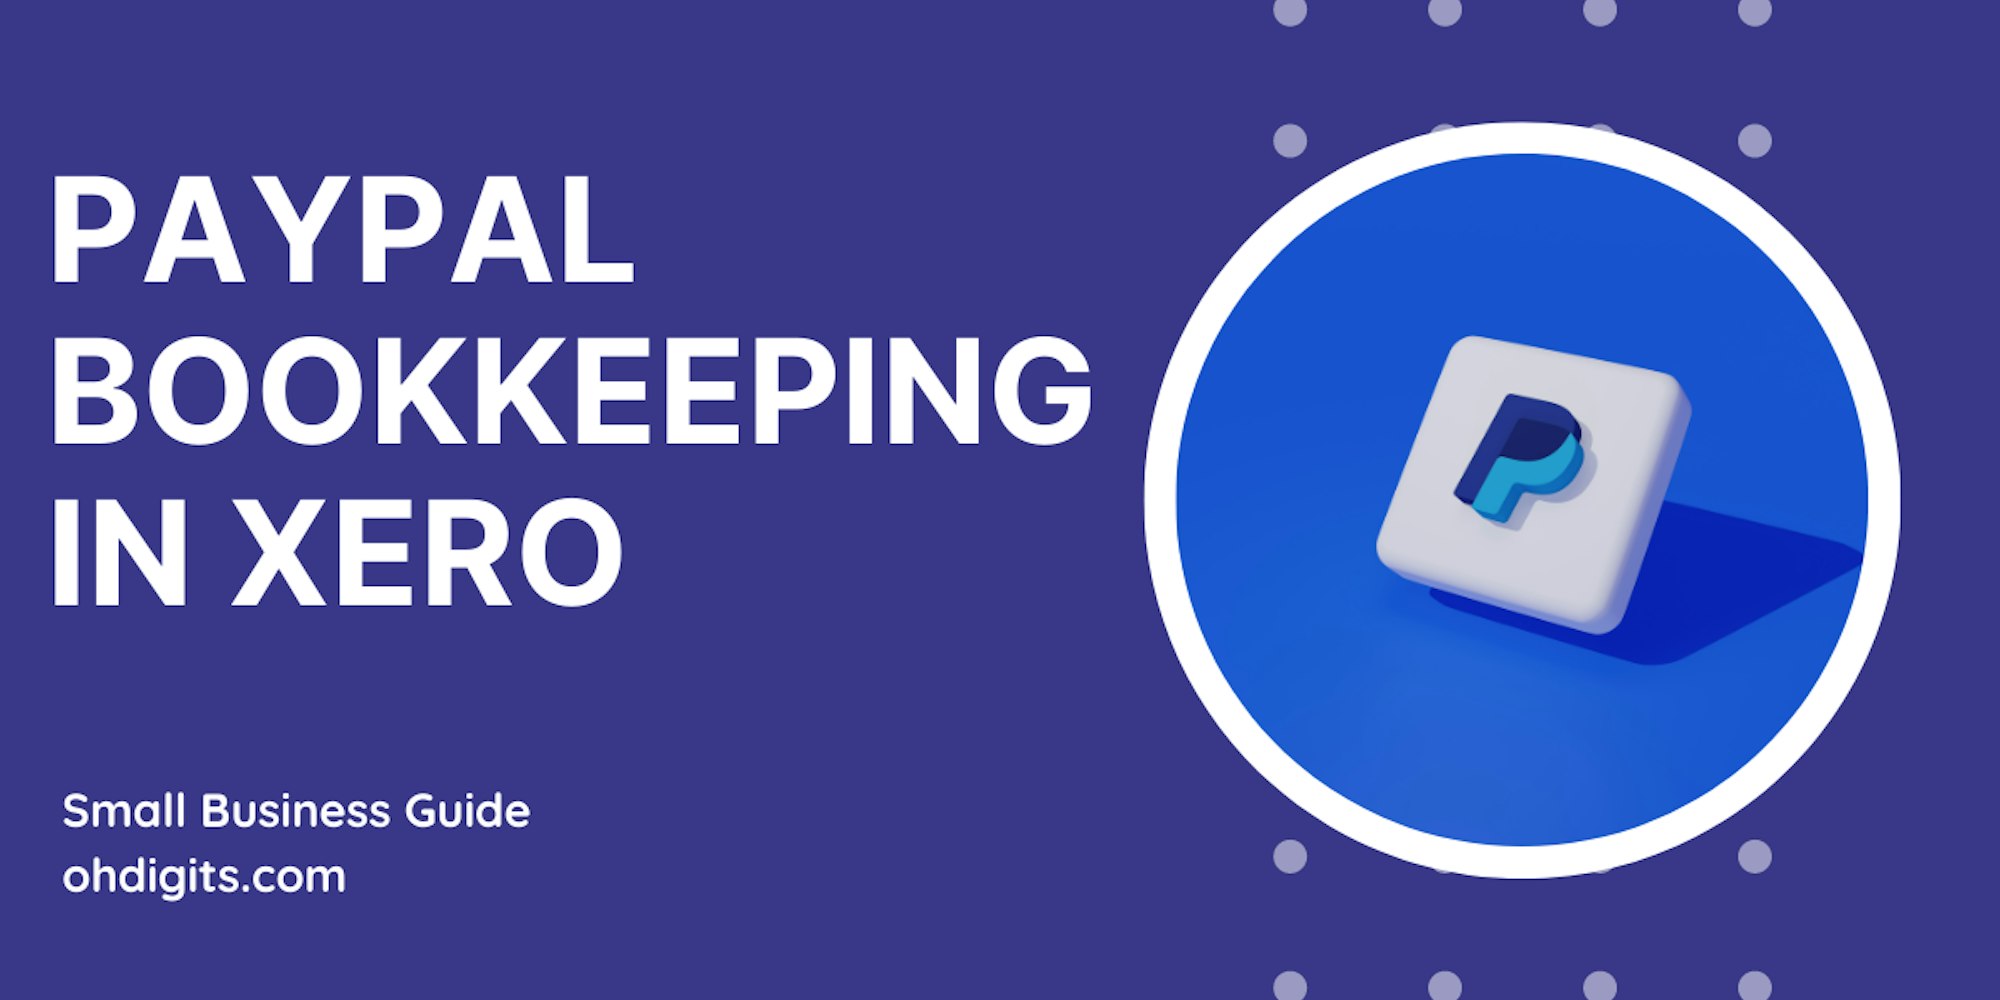 Paypal bookkeeping in xero